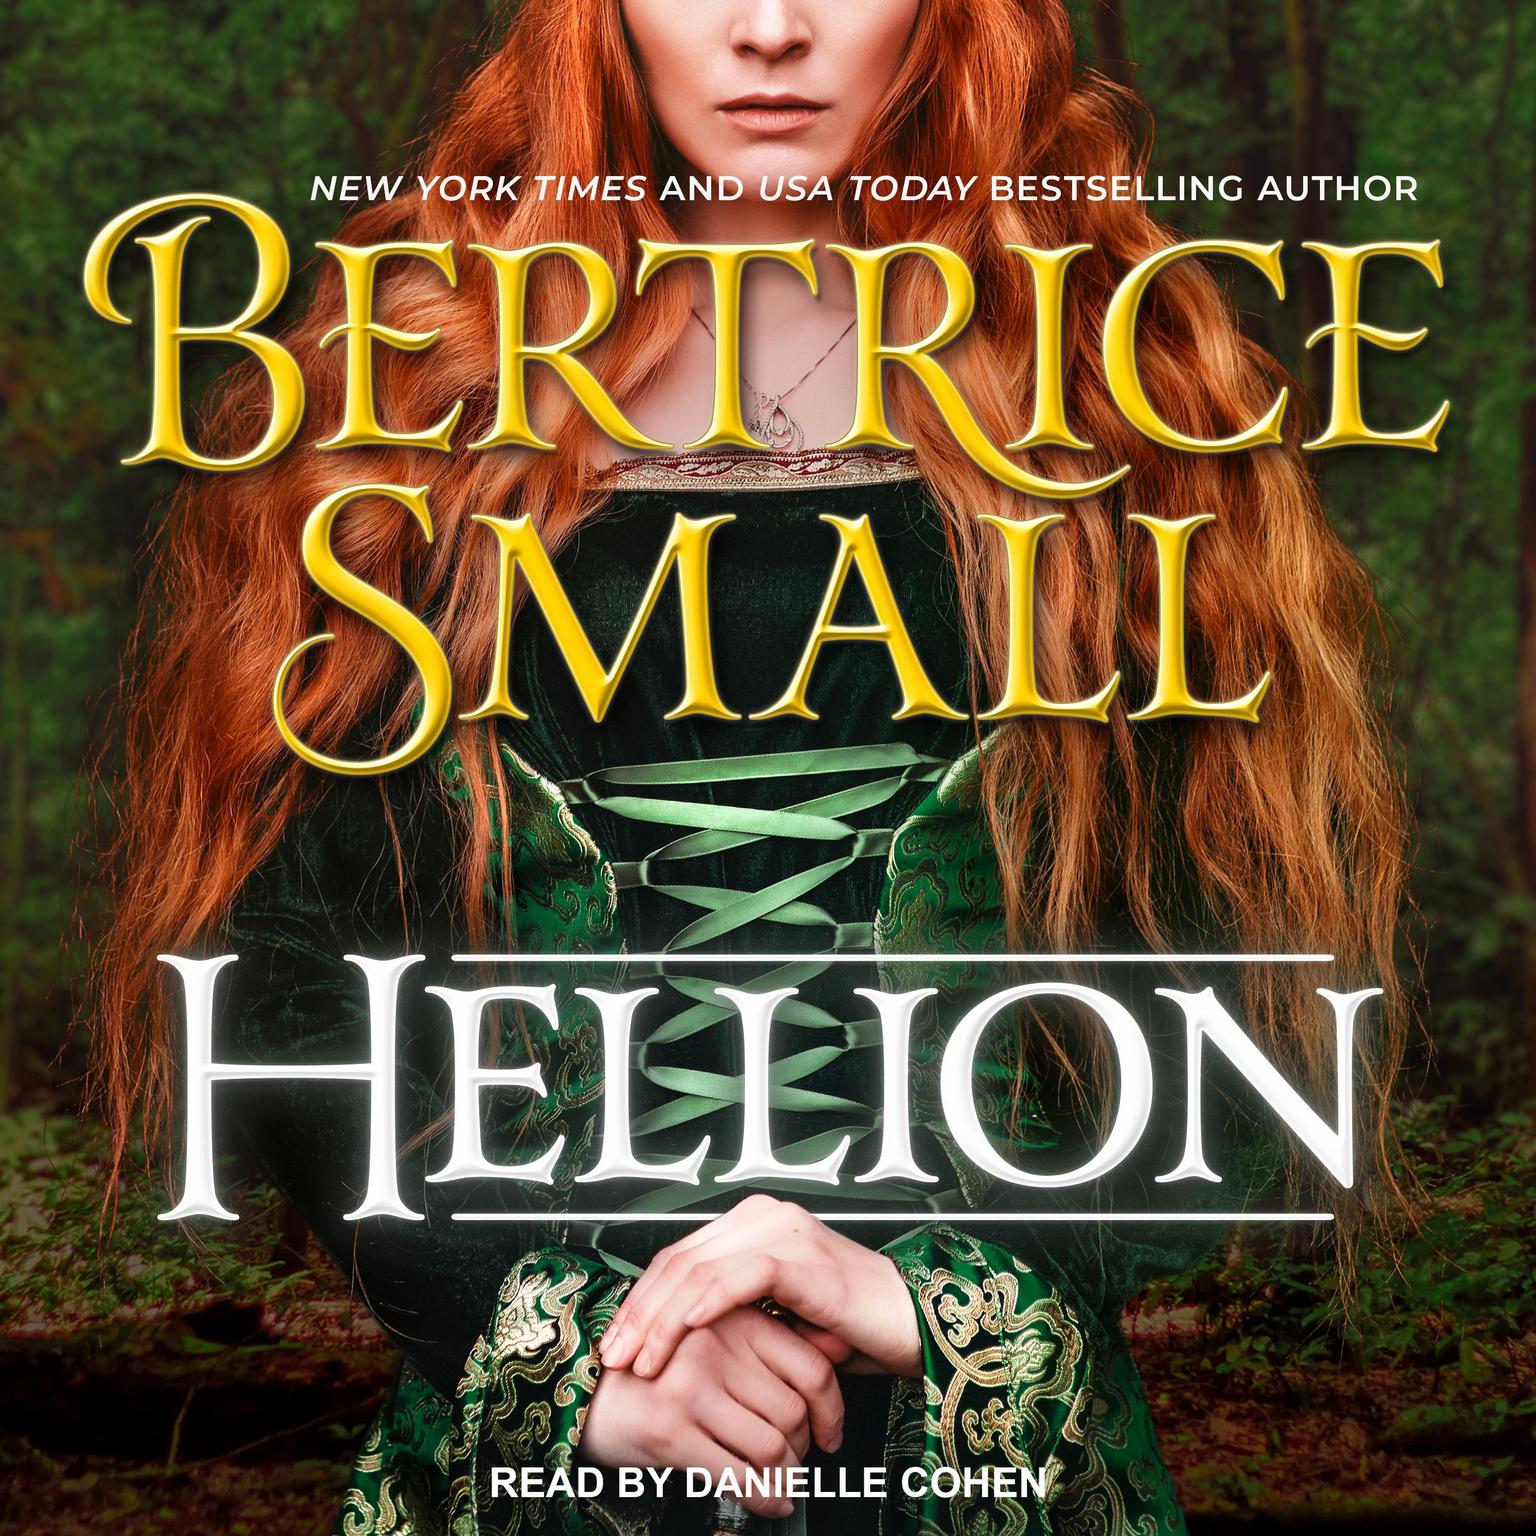 Hellion: A Novel Audiobook, by Bertrice Small